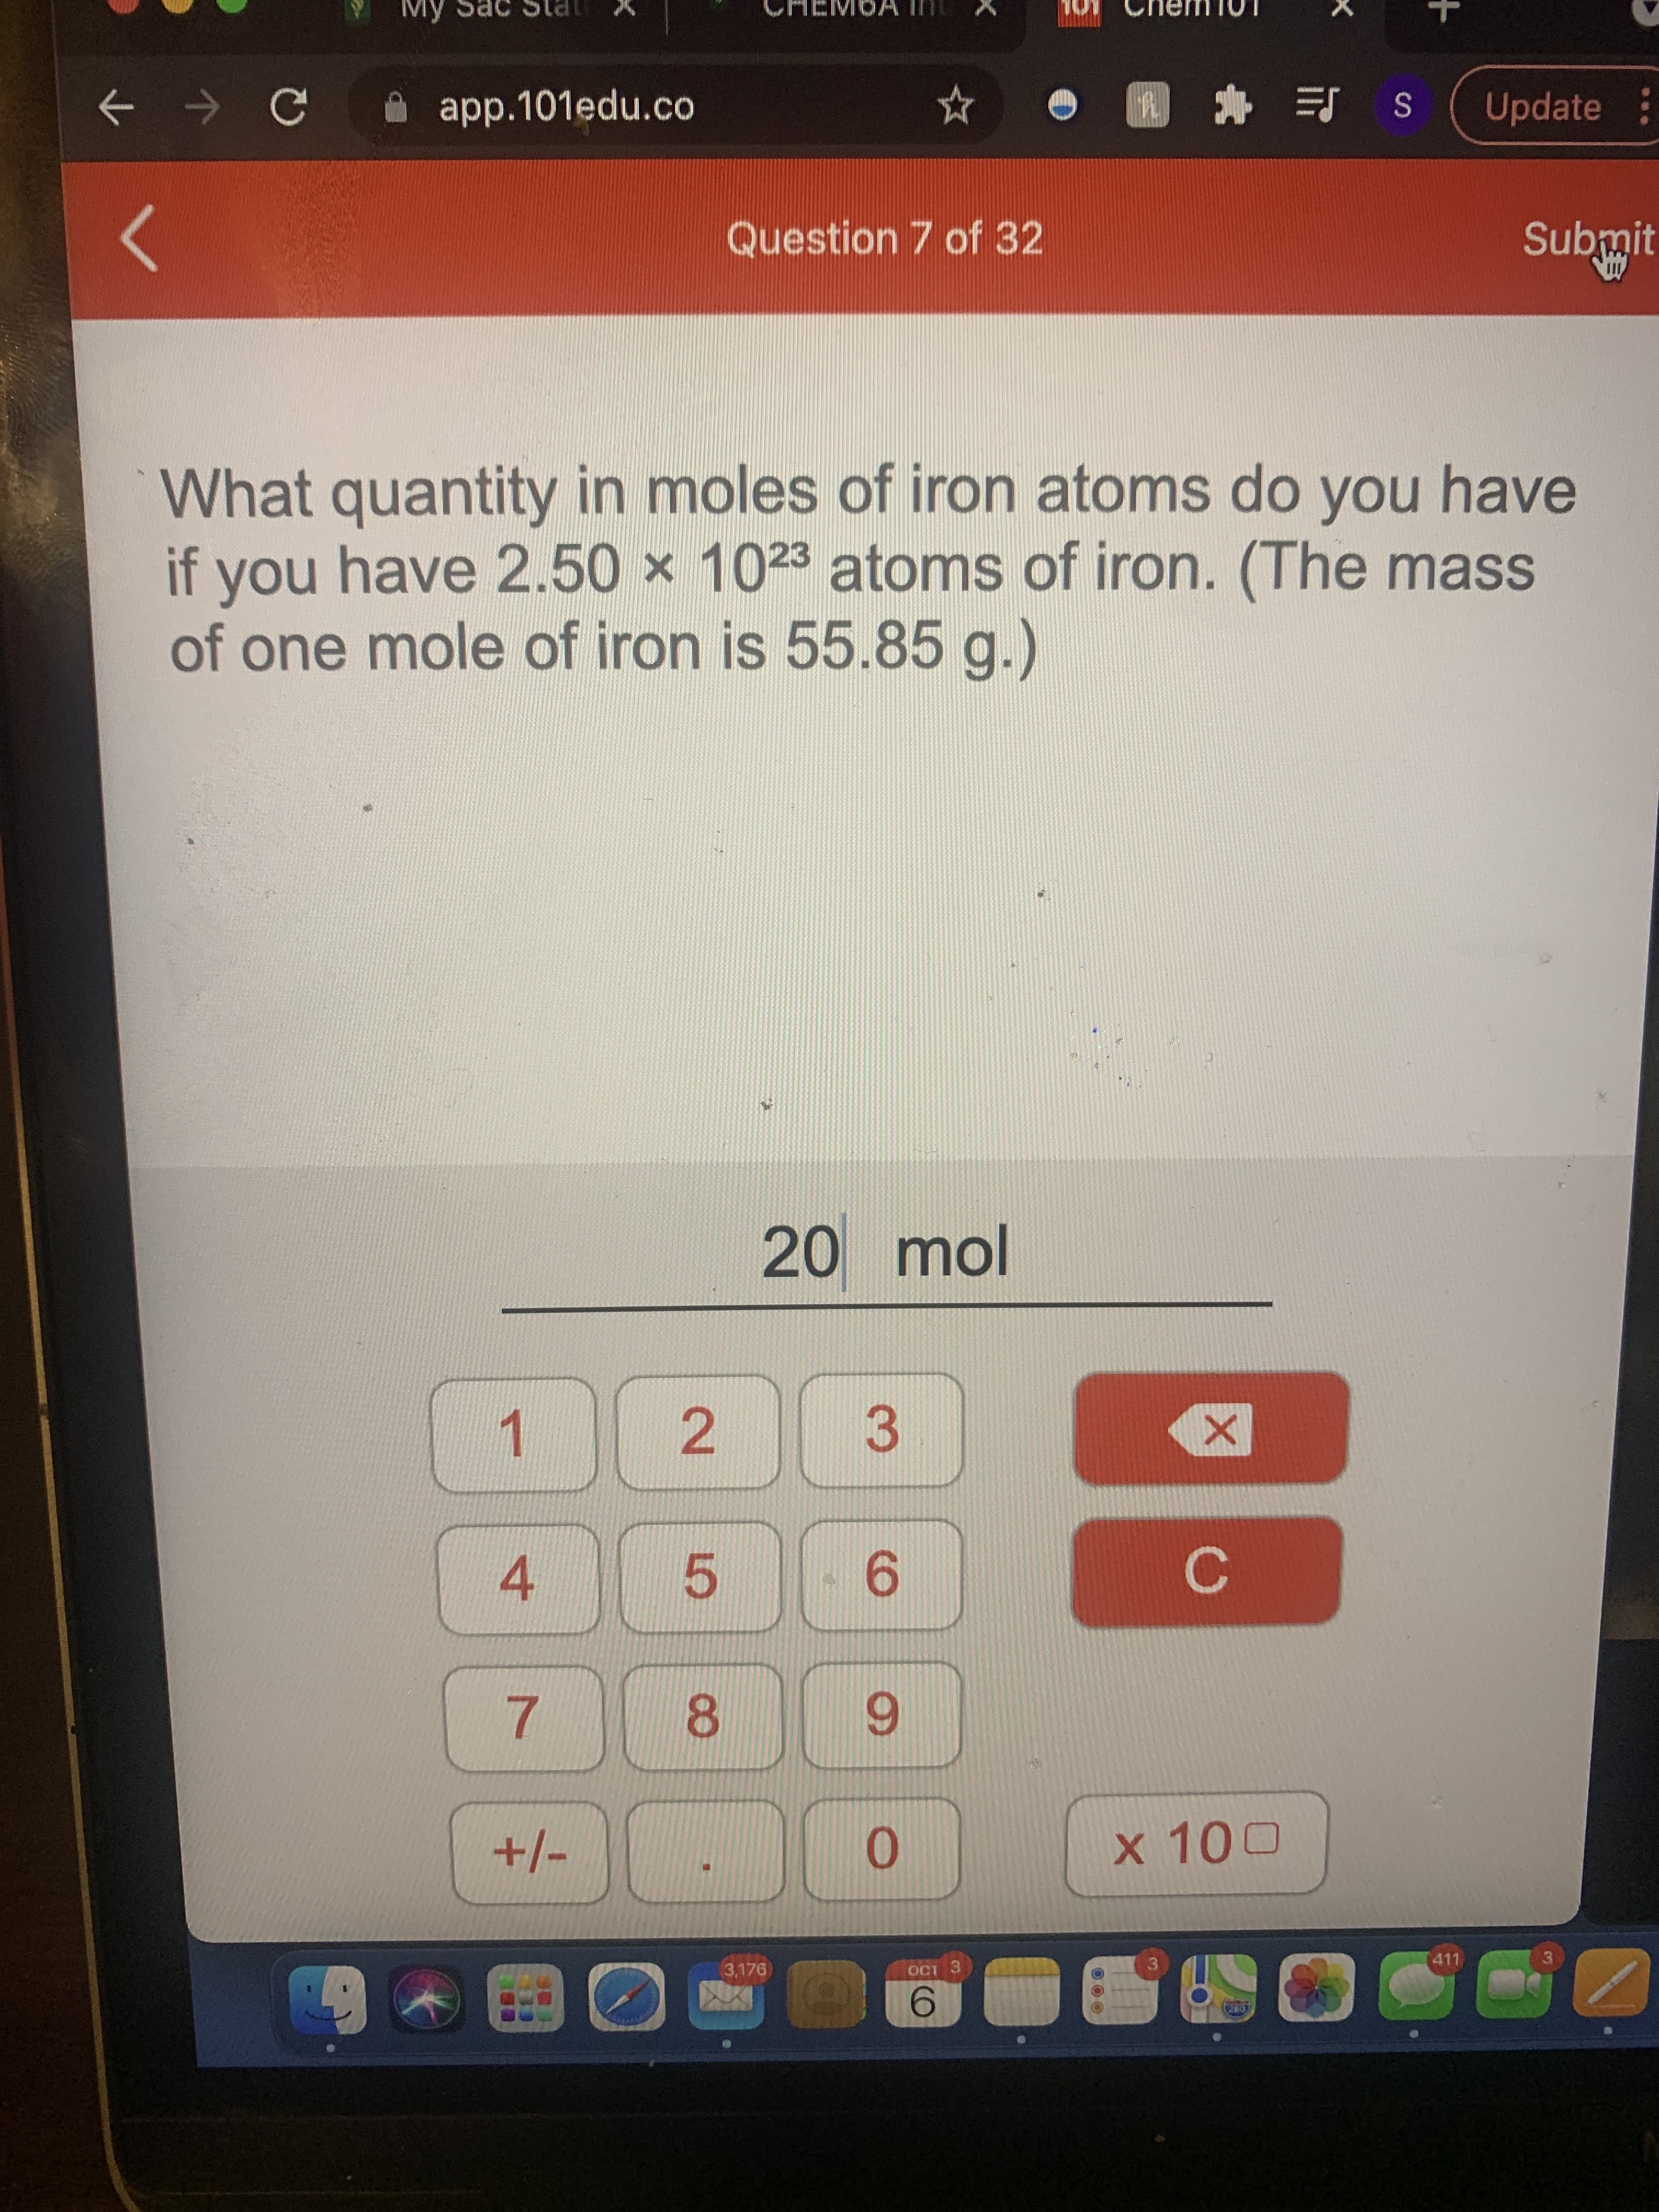 +
C.
2.
My Sac
Update
app.101edu.co
O 个 →
Submit
Question 7 of 32
What quantity in moles of iron atoms do you have
if you have 2.50 x 1023 atoms of iron. (The mass
of one mole of iron is 55.85 g.)
20 mol
1.
3.
6.
5.
4.
8.
9.
7.
+/-
411
3.
3,176
3.
